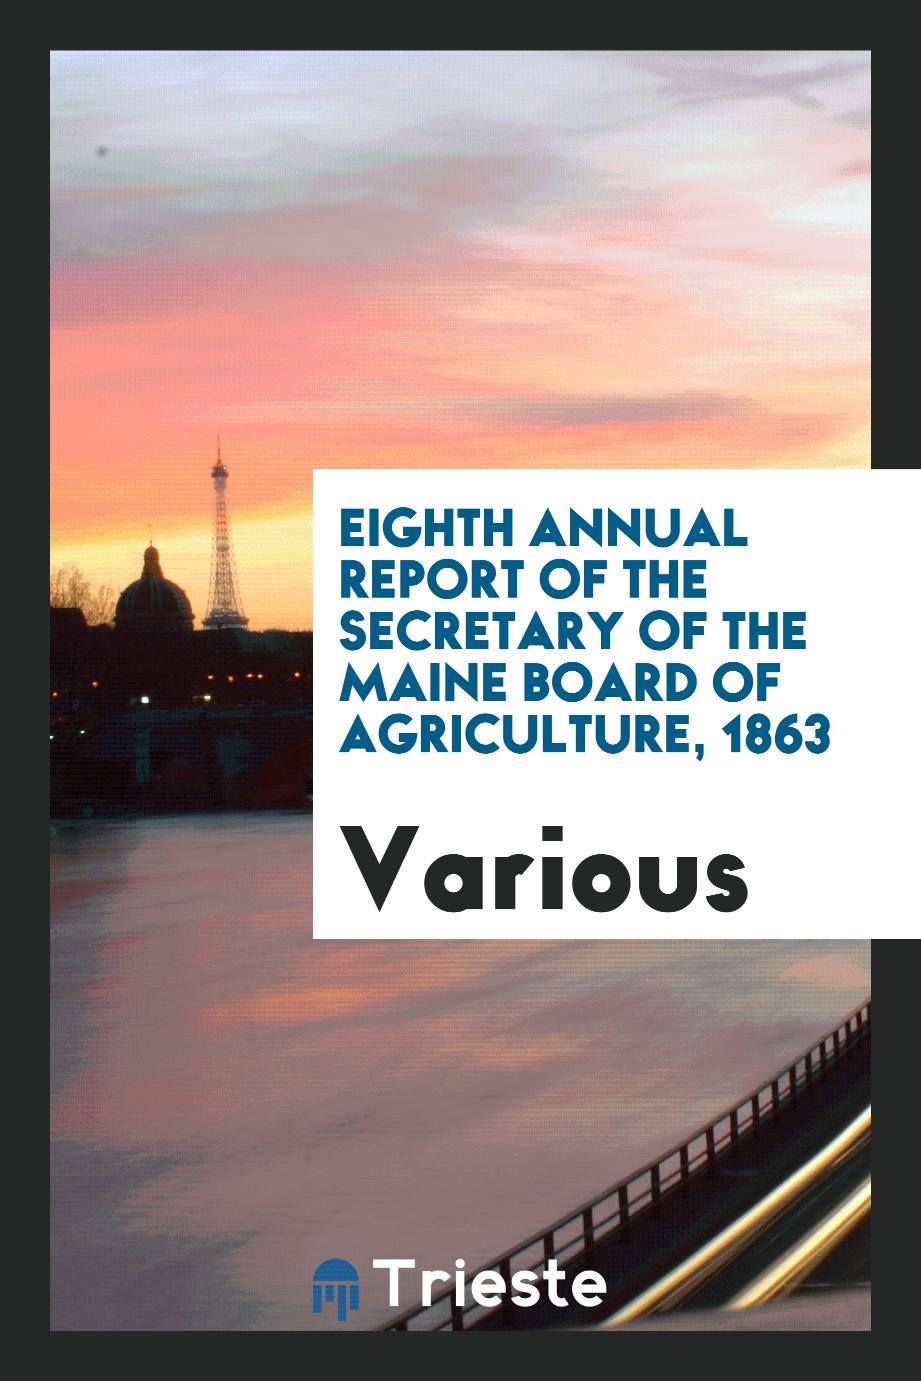 Eighth Annual Report of the Secretary of the Maine Board of Agriculture, 1863